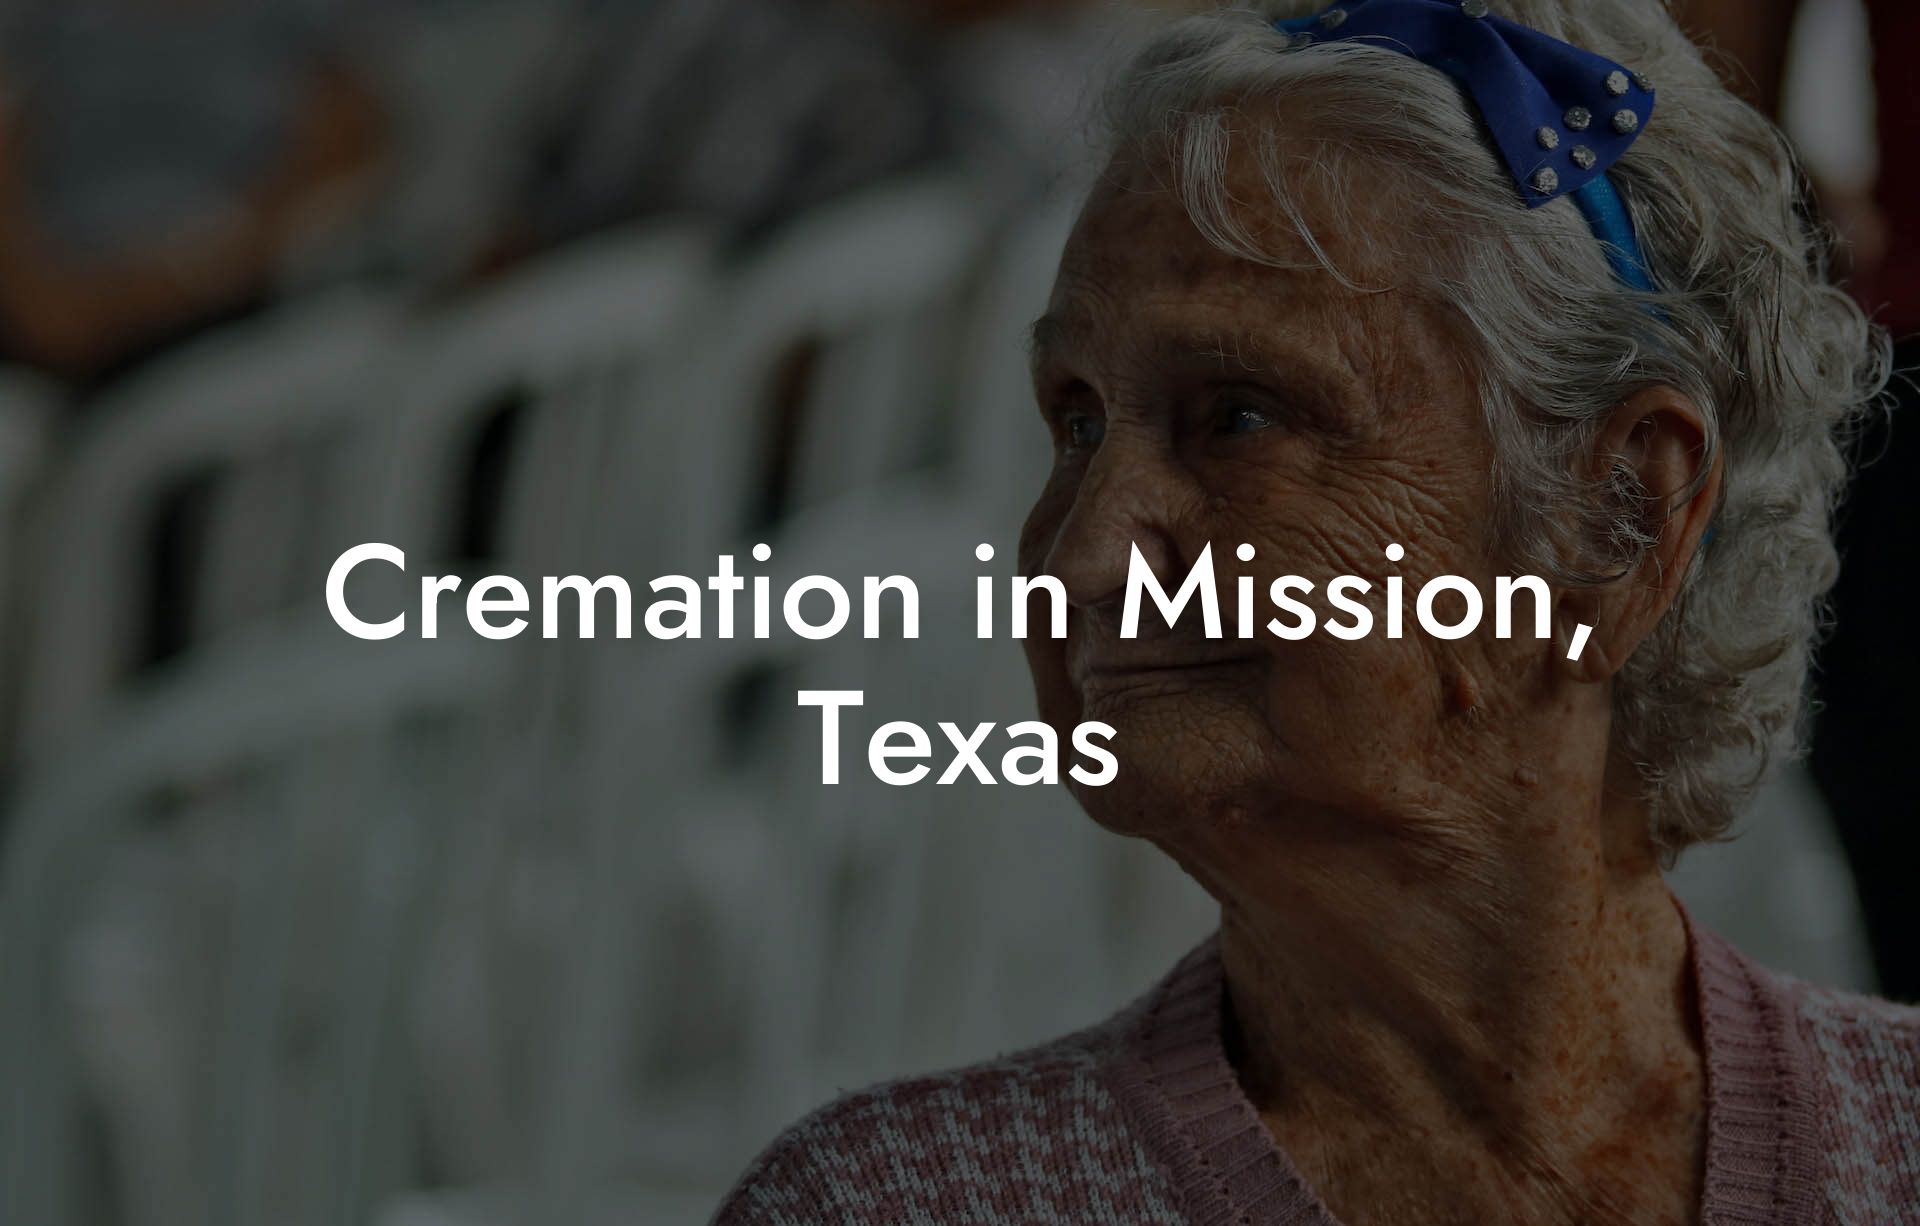 Cremation in Mission, Texas